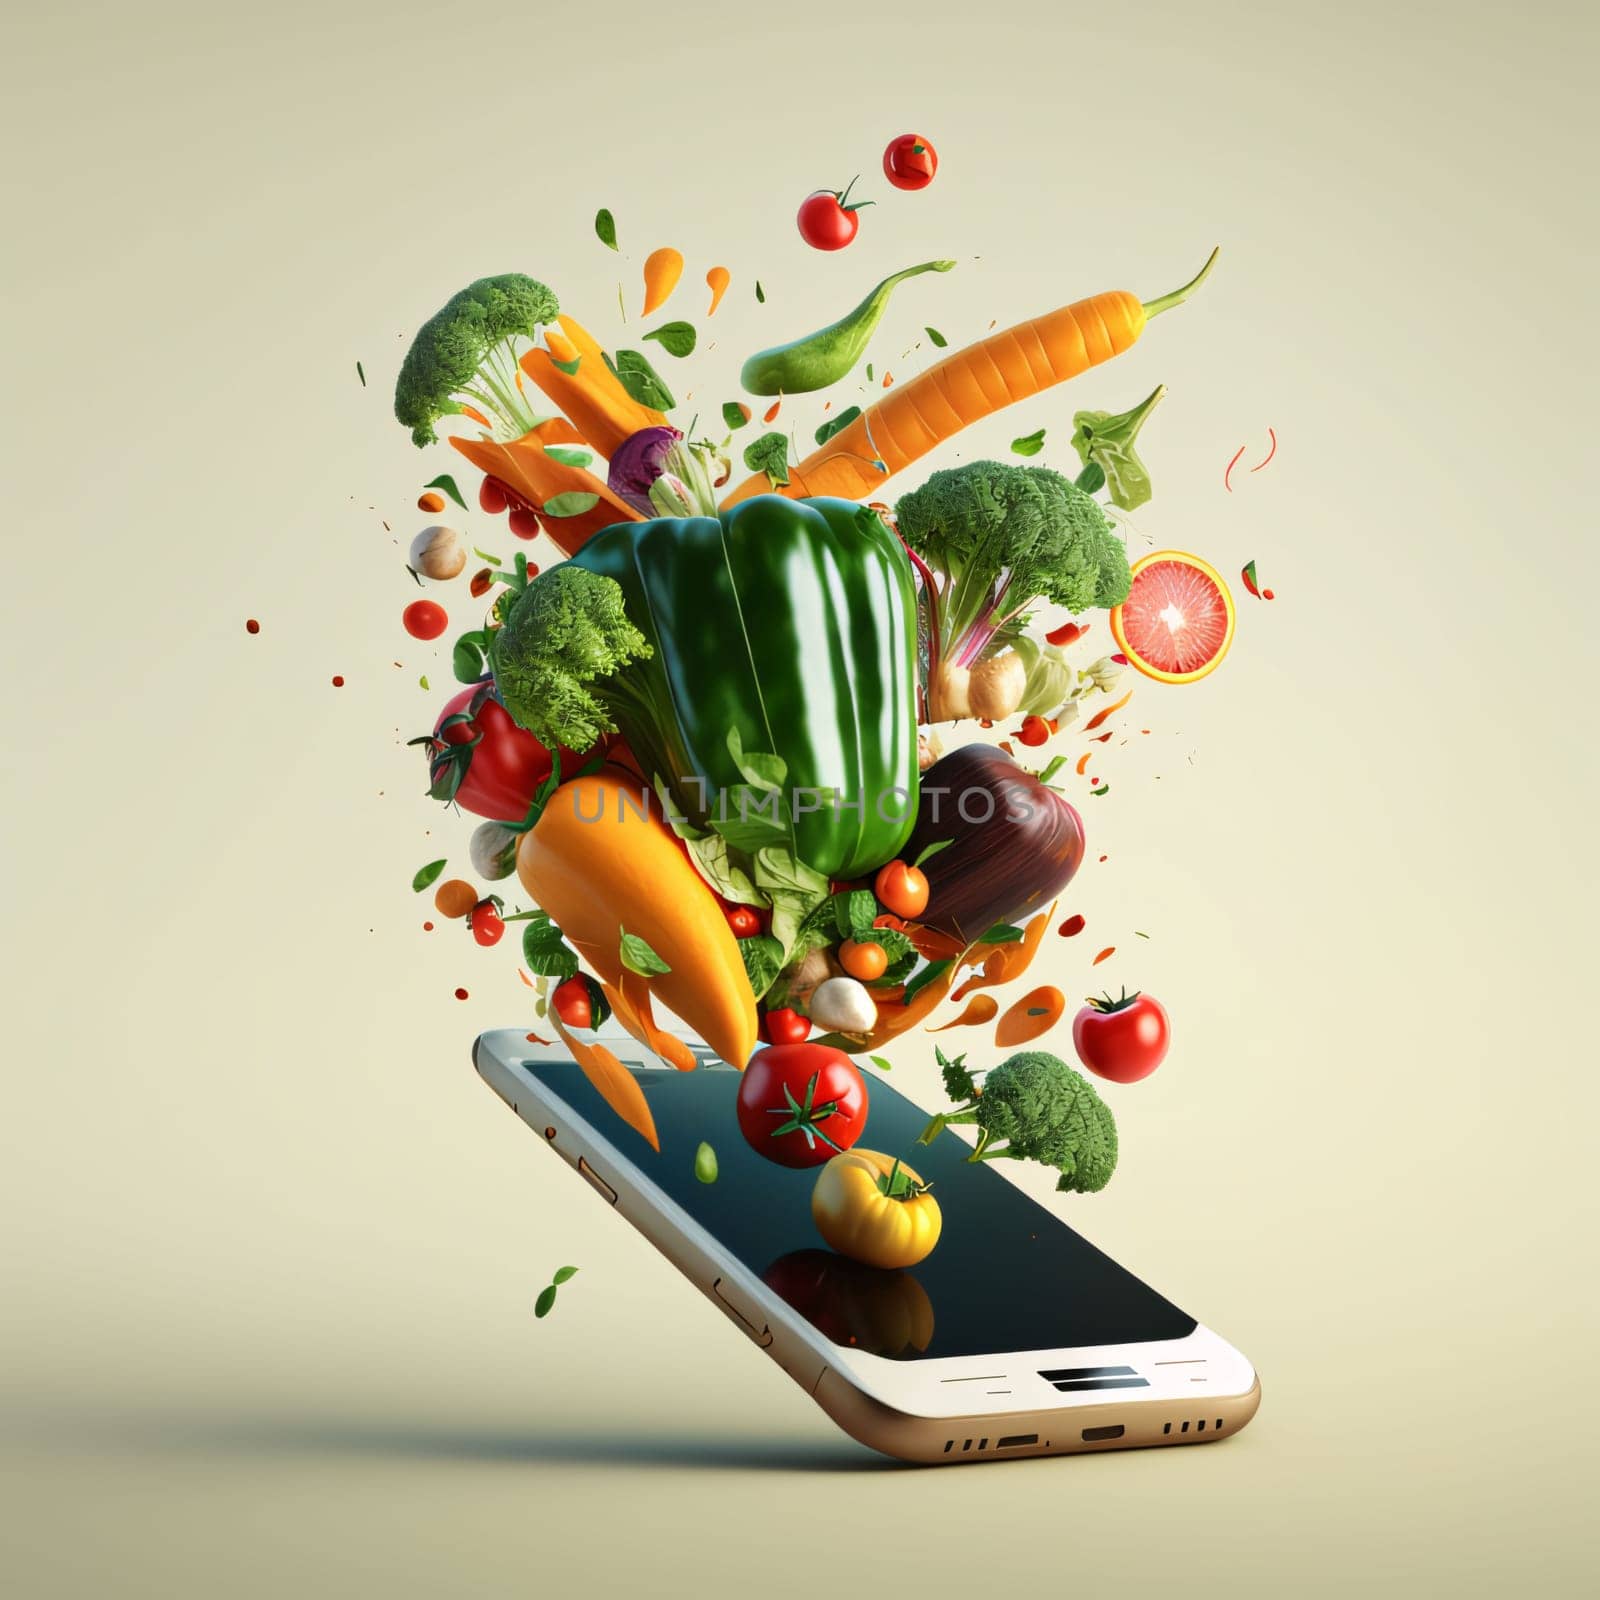 Smartphone screen: Smartphone with vegetables flying out of it. 3d illustration.